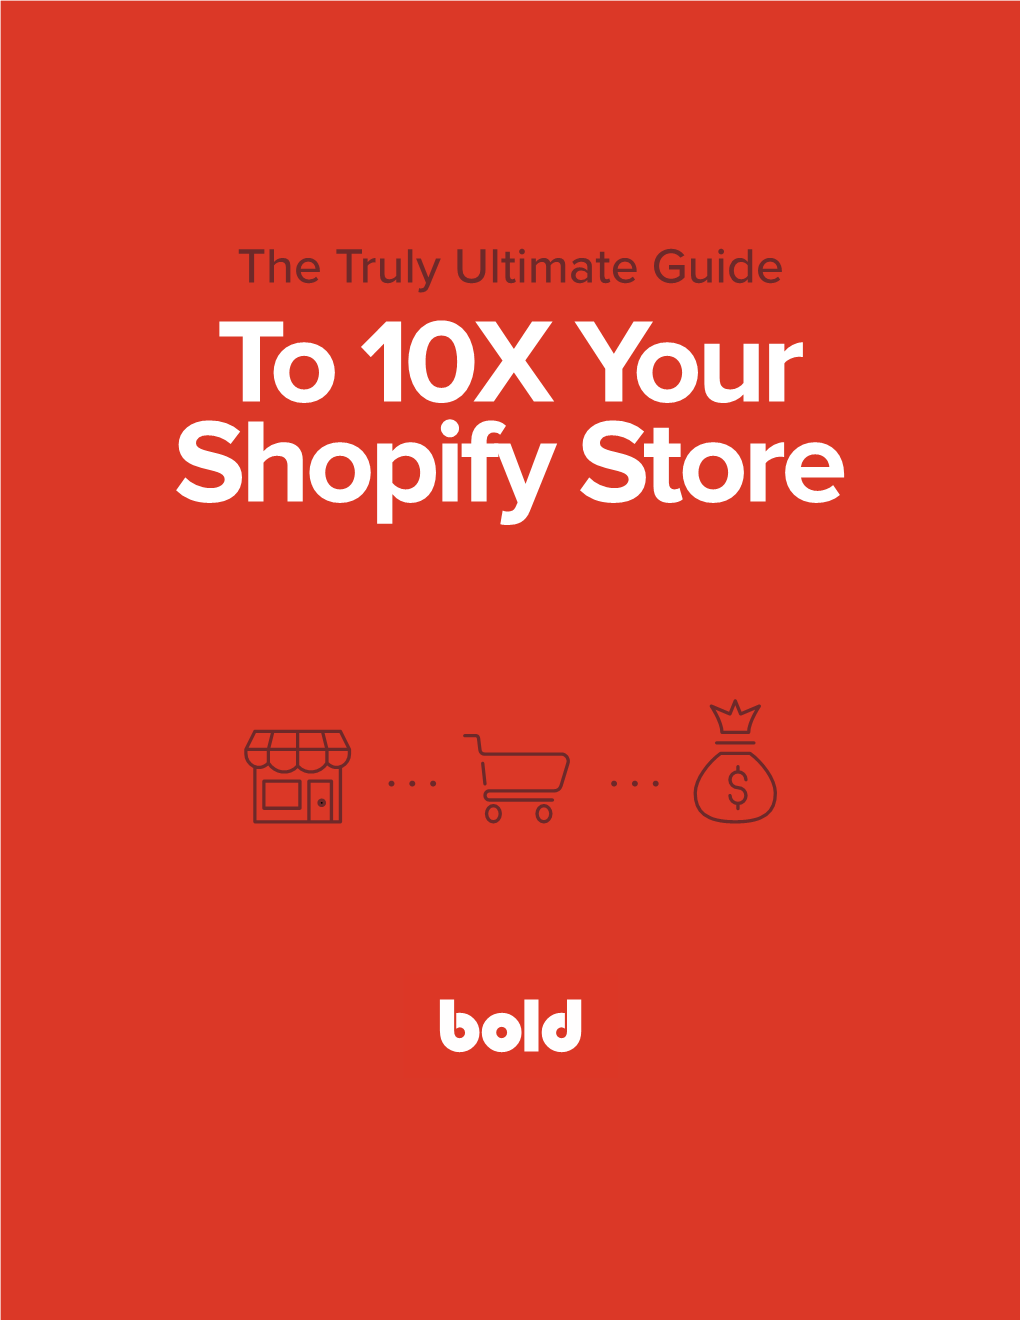 The Truly Ultimate Guide to 10X Your Shopify Store Good News: You Don’T Have to Know Everything to Grow an Online Store